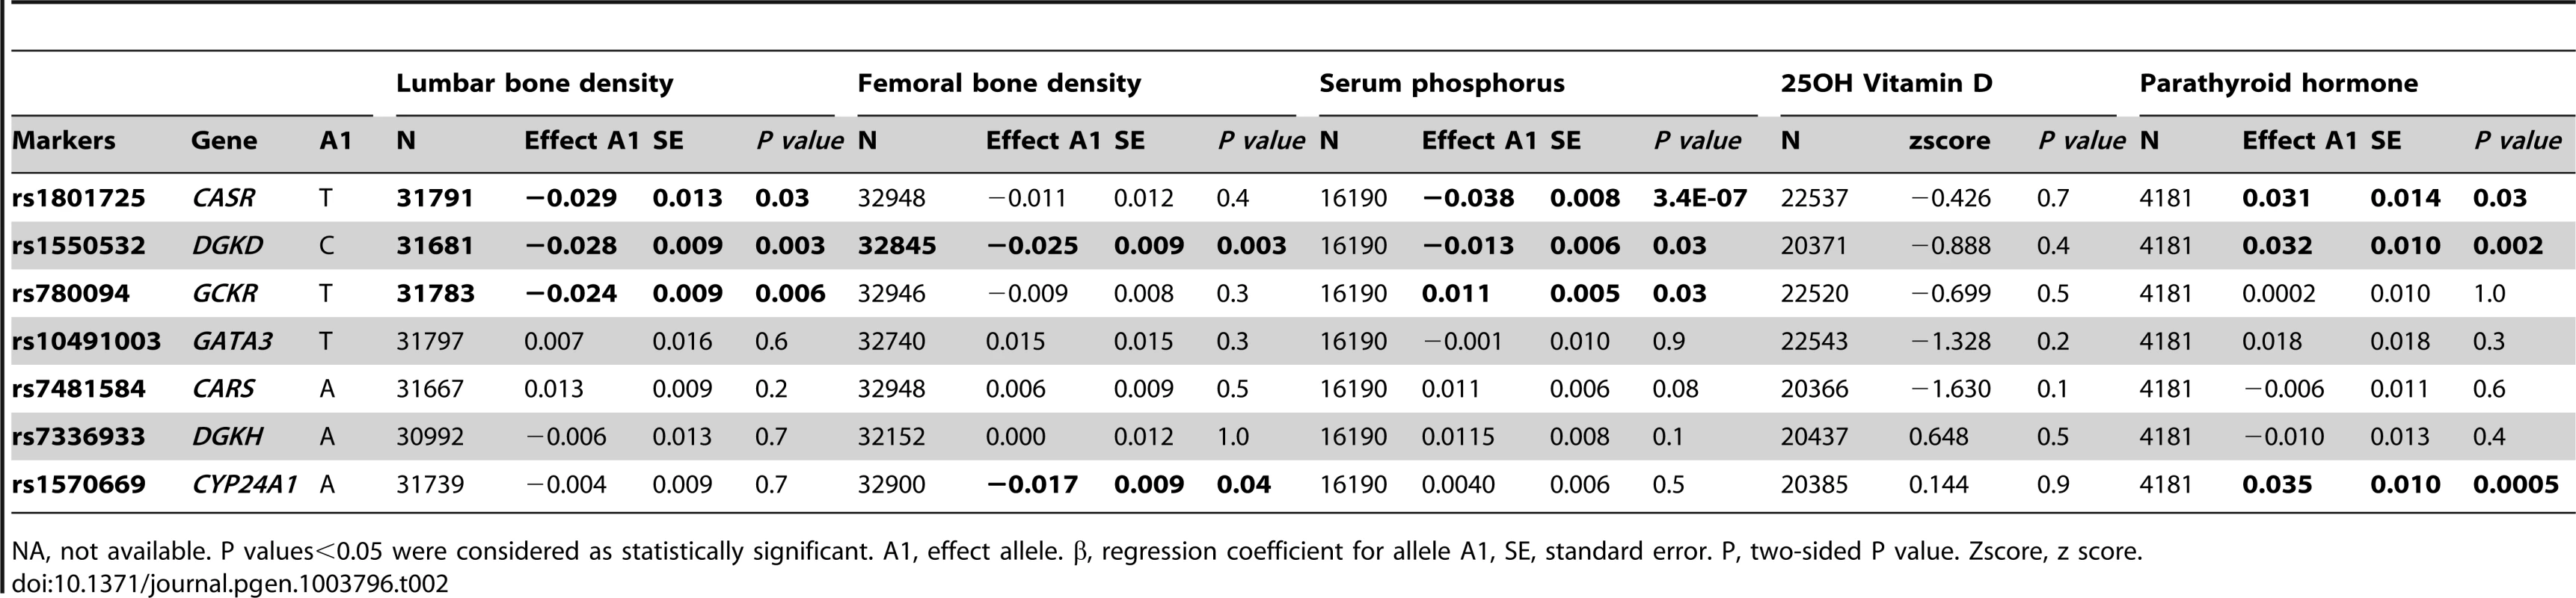 Look-ups of serum calcium loci with related phenotypes: bone mineral density in the GEFOS dataset <em class=&quot;ref&quot;>[6]</em> and endocrine phenotypes from the SHIP, SHIP Trend and SUNLIGHT <em class=&quot;ref&quot;>[7]</em> datasets.